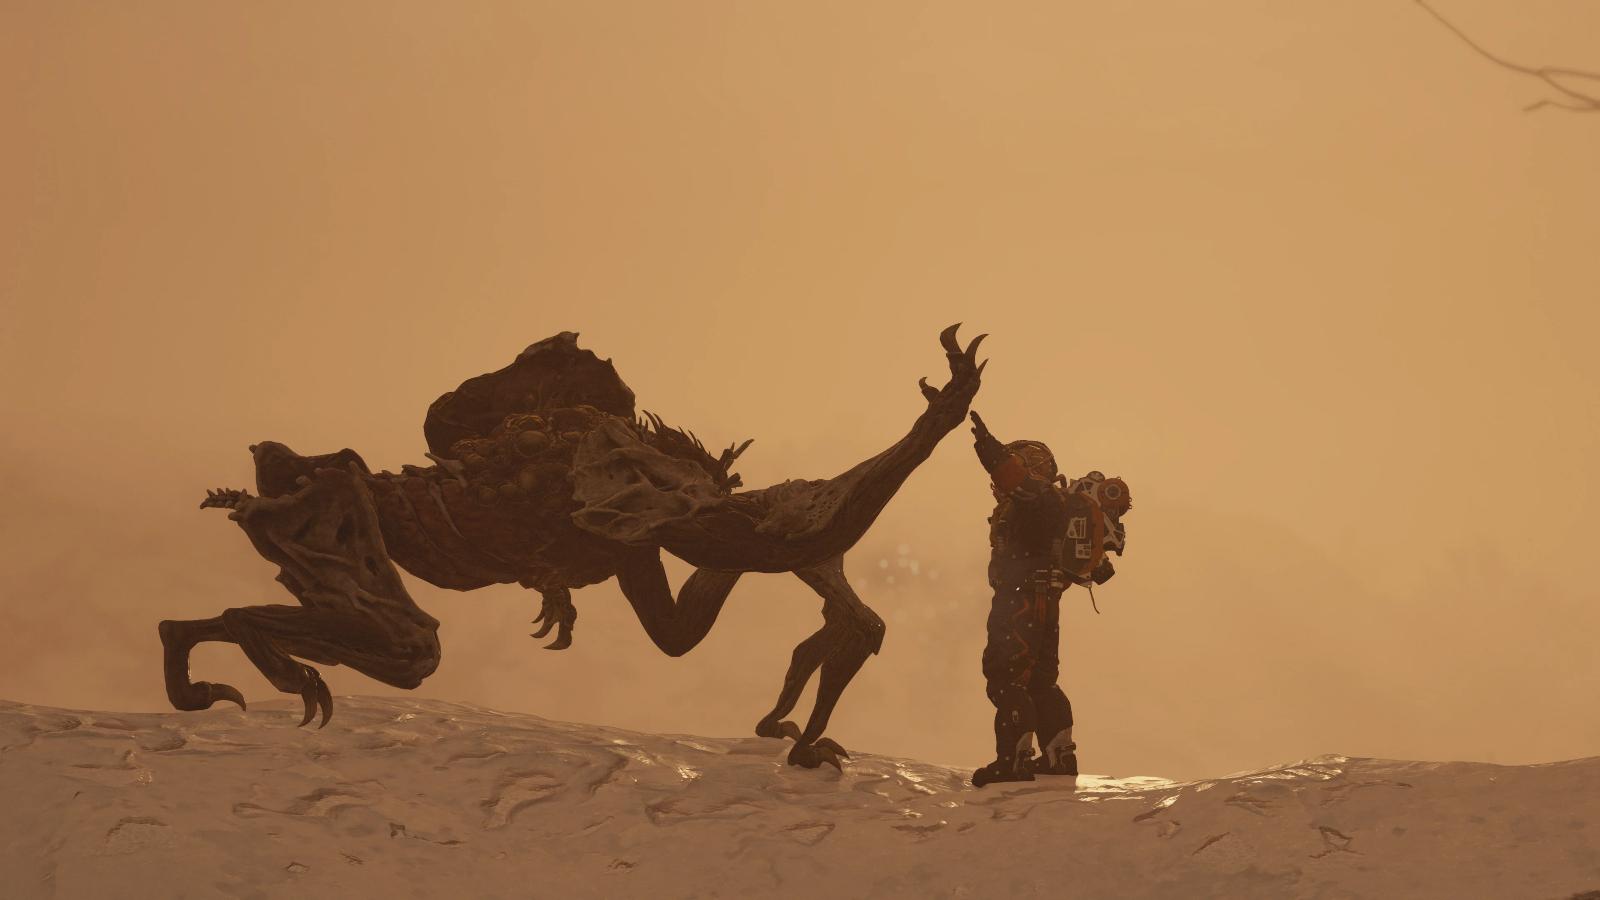 Starfield player high fiving a creature